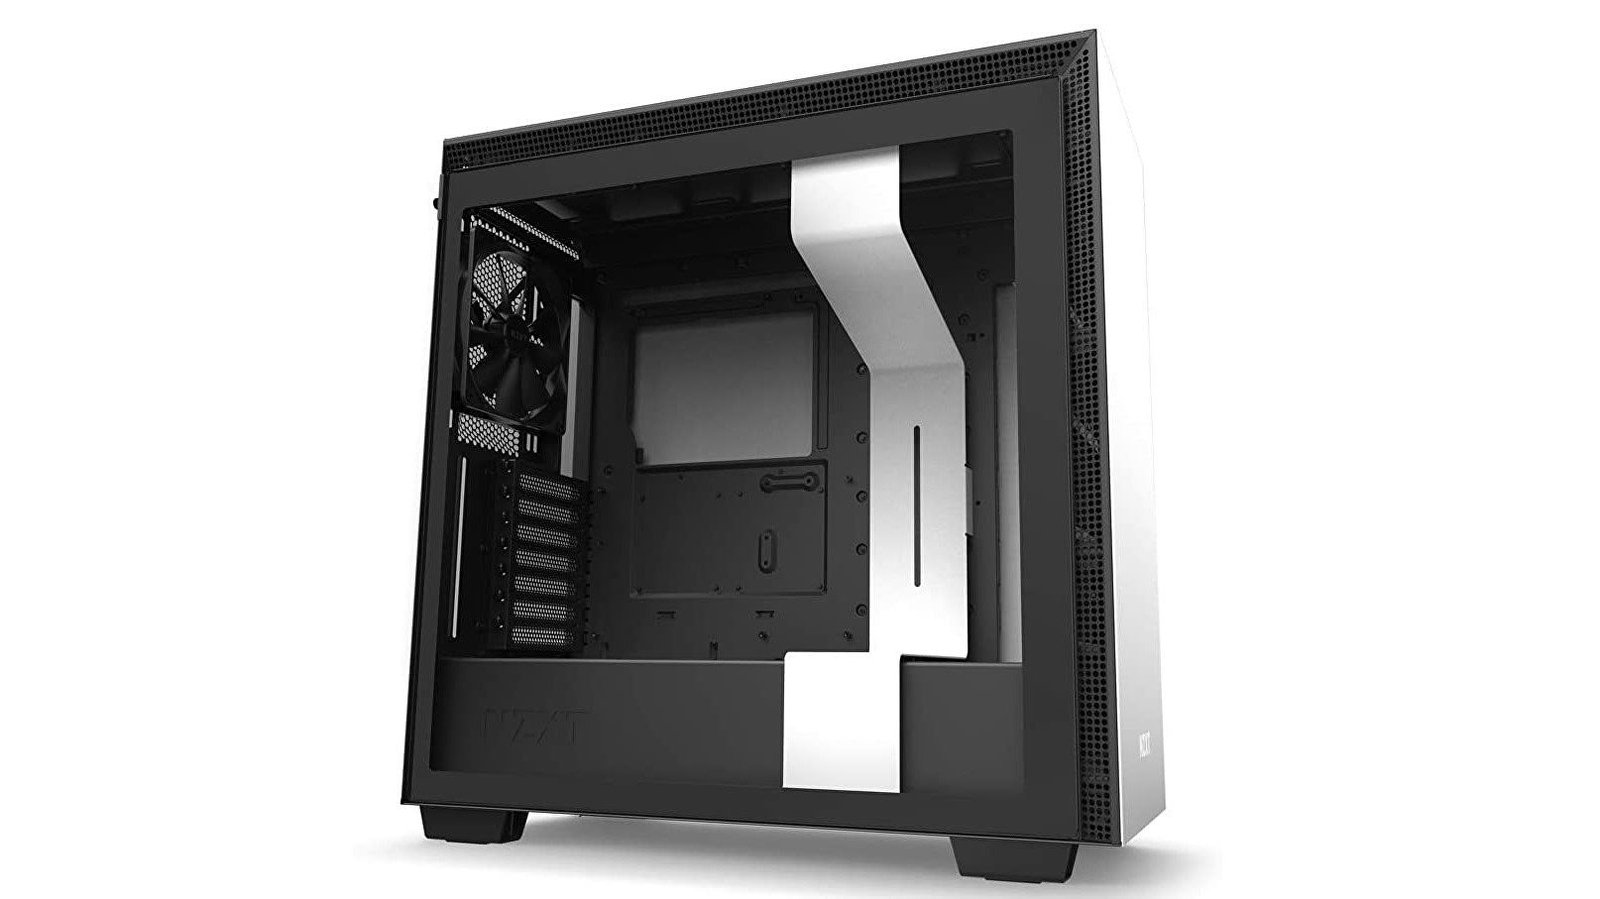 The tremendous NZXT H710 PC case has shed £40 on Dusky Friday